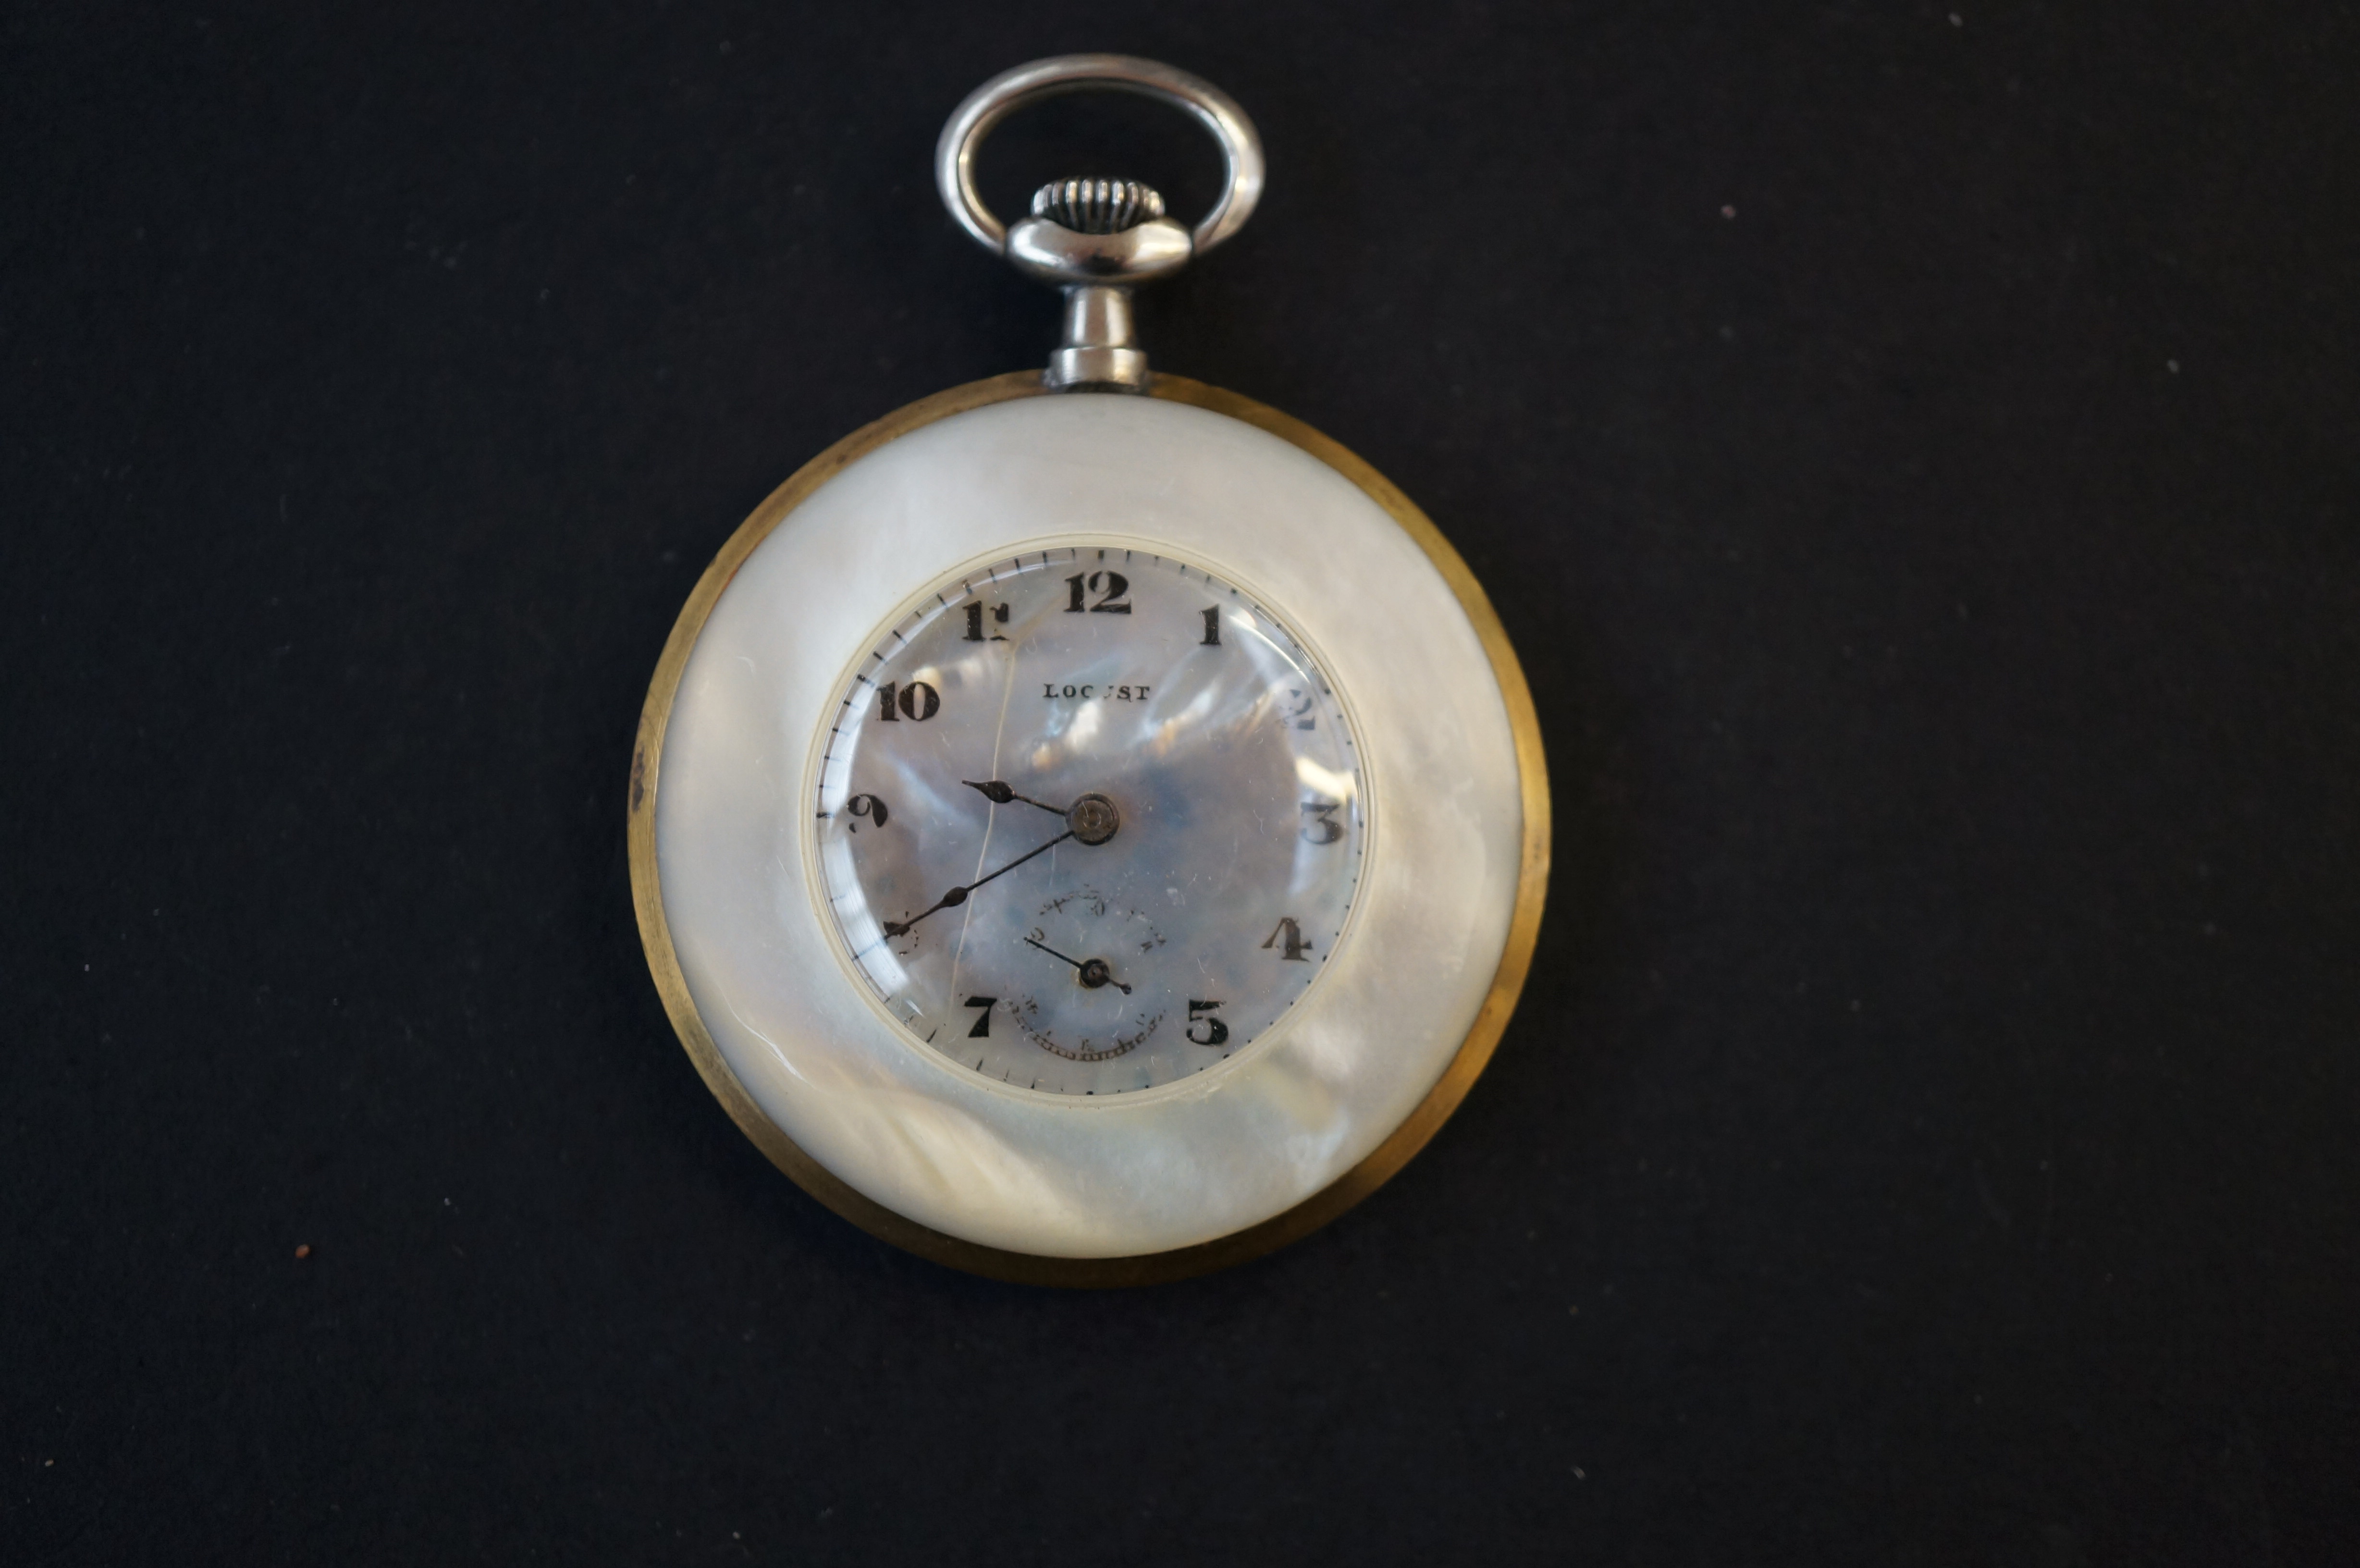 Locust mother of pearl pocket watch - currently ti